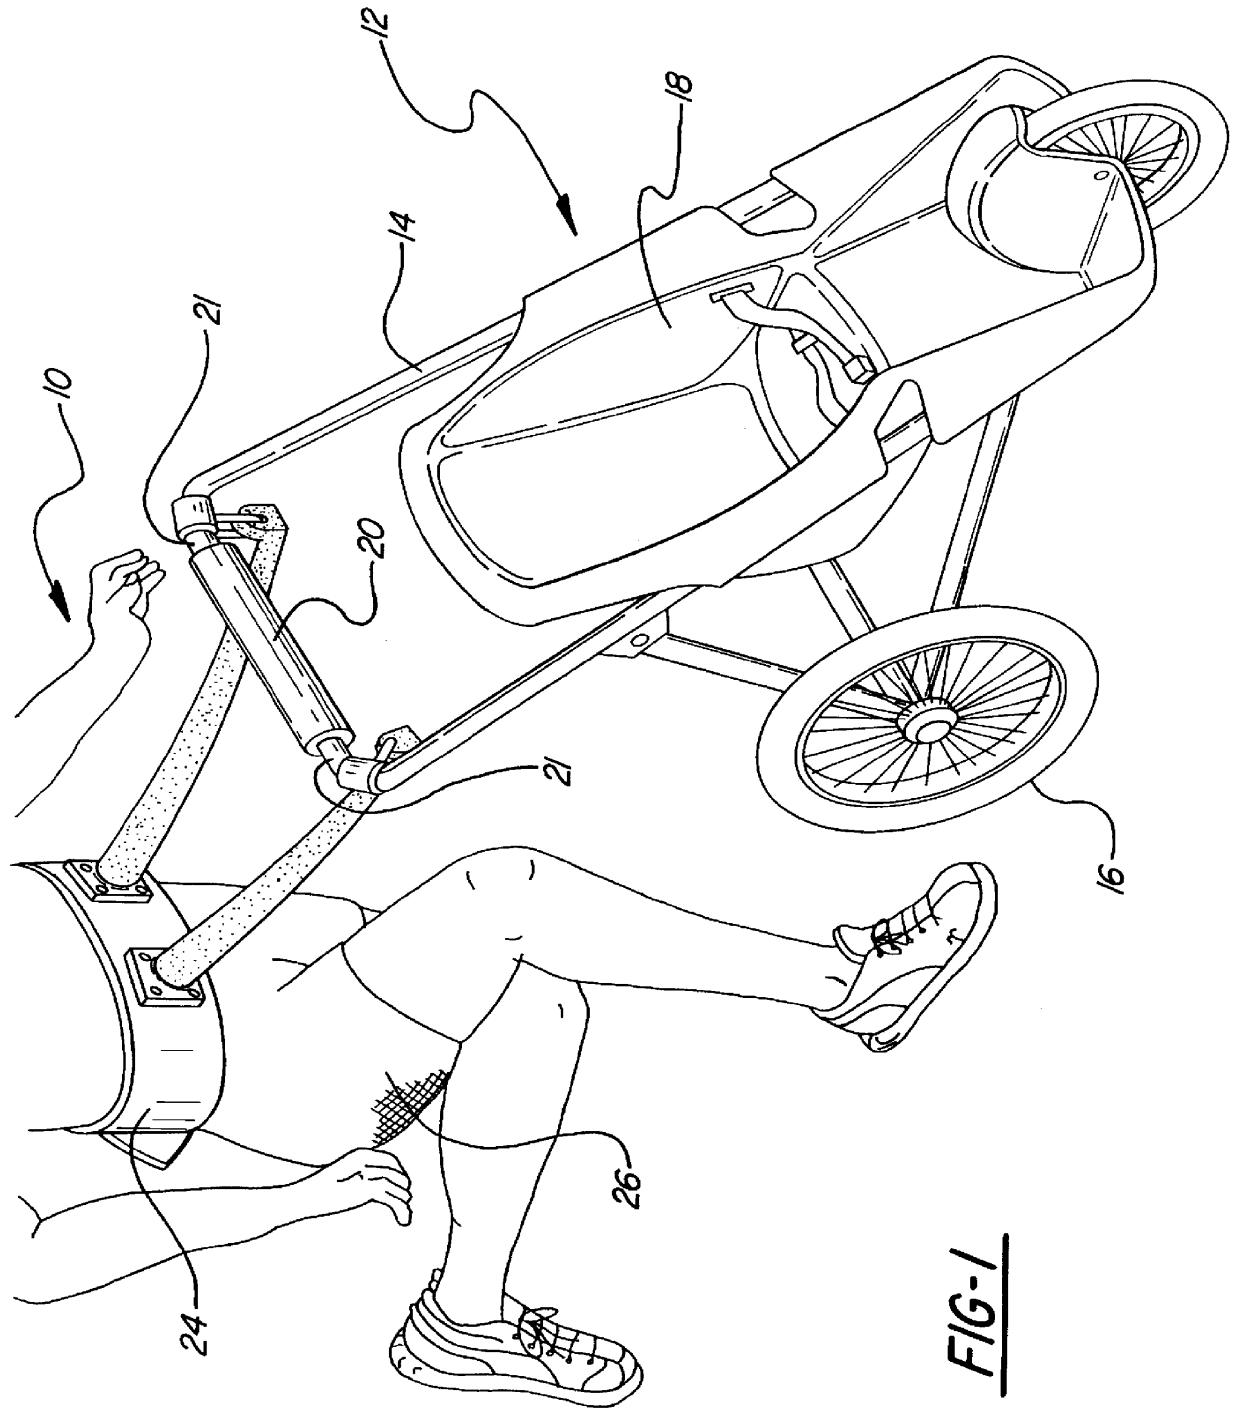 Attachment for a baby stroller